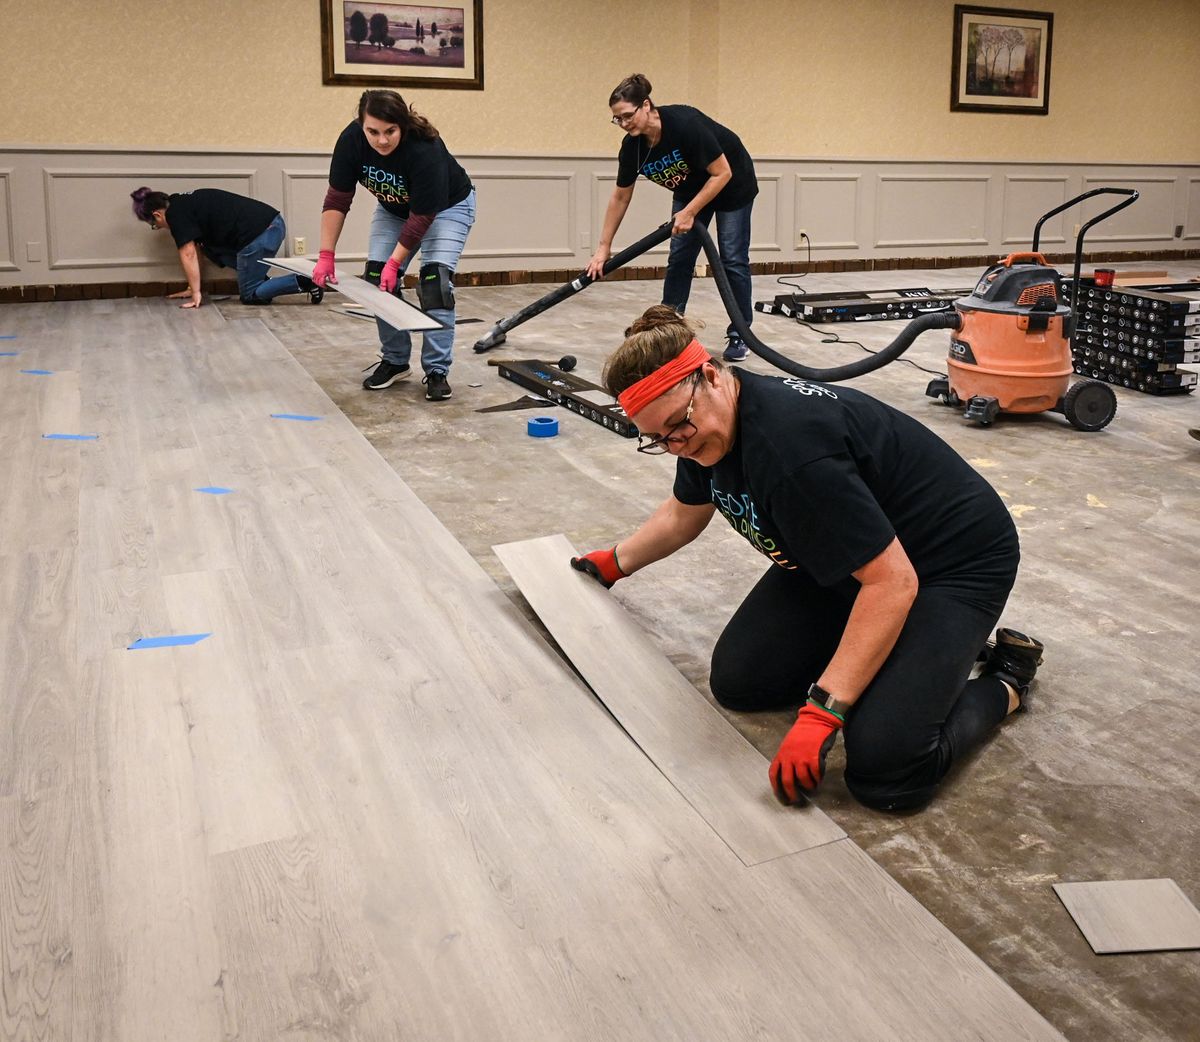 Employee representing 18 local credit unions, including Becky Gaines, STCU, standing, Sarah Dahmen, Spokane Media Federal Credit Union, vacuuming and Wendie Ellis, Horizon Credit Union, front, join forces to lay flooring inside Spokane